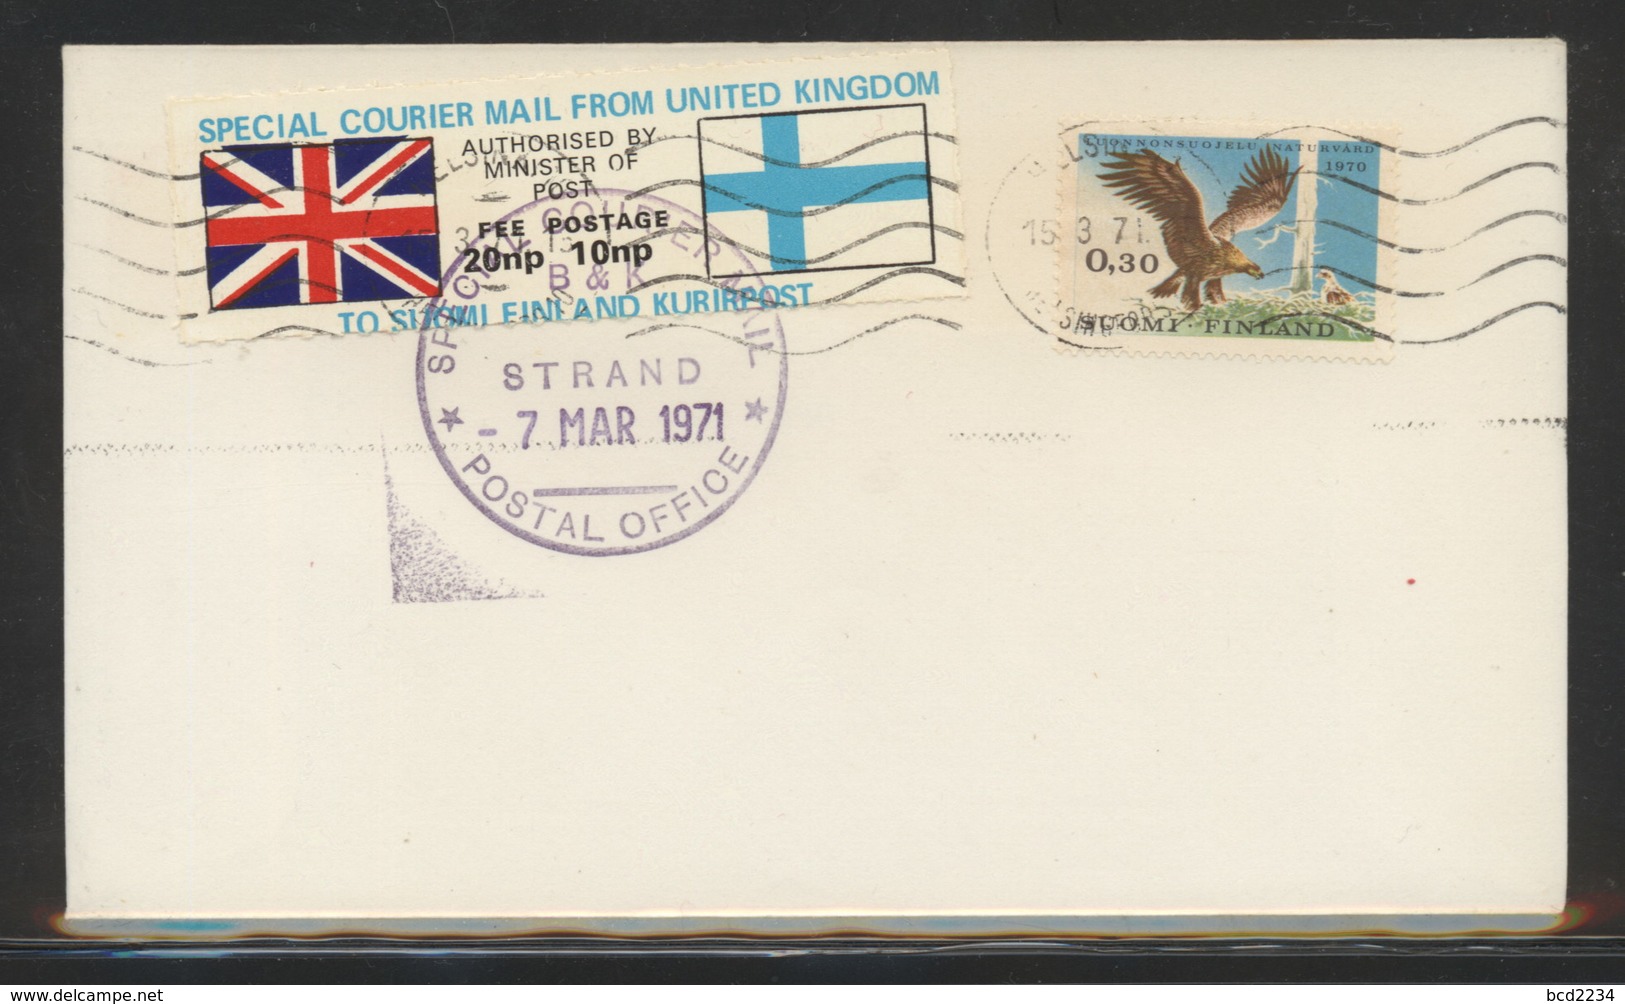 GREAT BRITAIN GB 1971 POSTAL STRIKE MAIL SPECIAL COURIER MAIL 2ND ISSUE DECIMAL COVER STRAND LONDON TO FINLAND 7 MARCH - Variedades Y Curiosidades